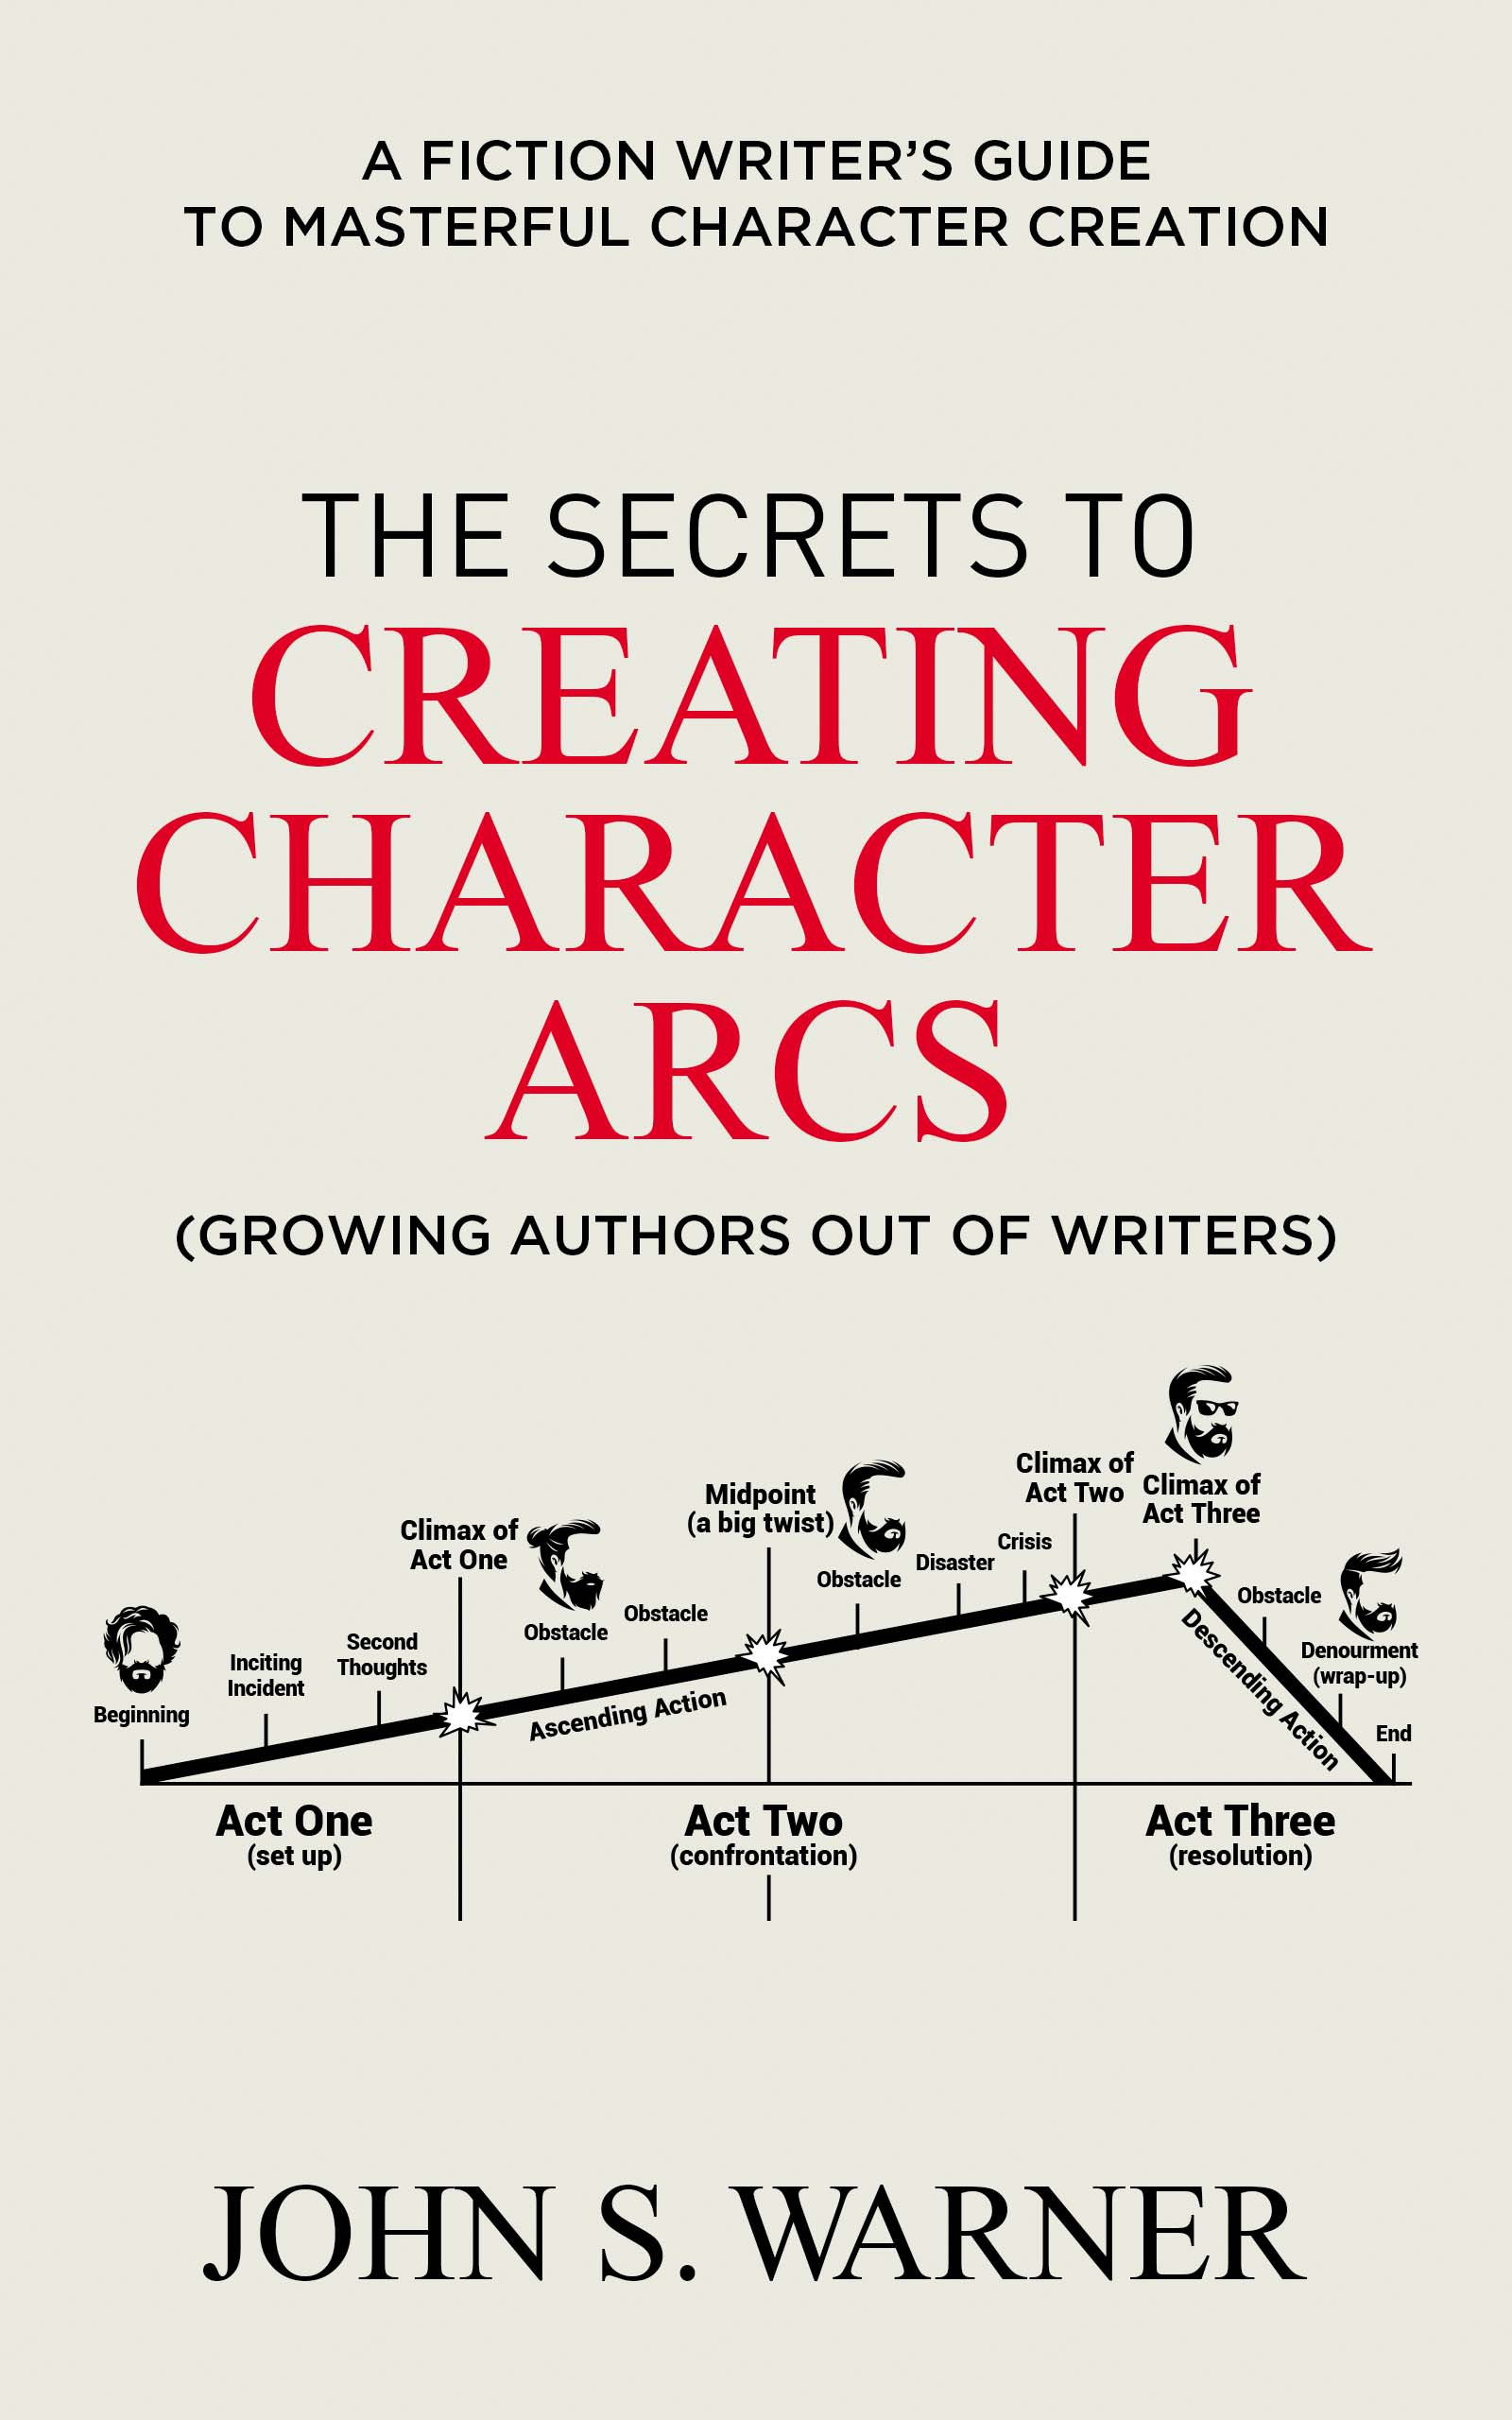 The Secrets to Creating Character Arcs: A Fiction Writer’s Guide to Masterful Character Creation